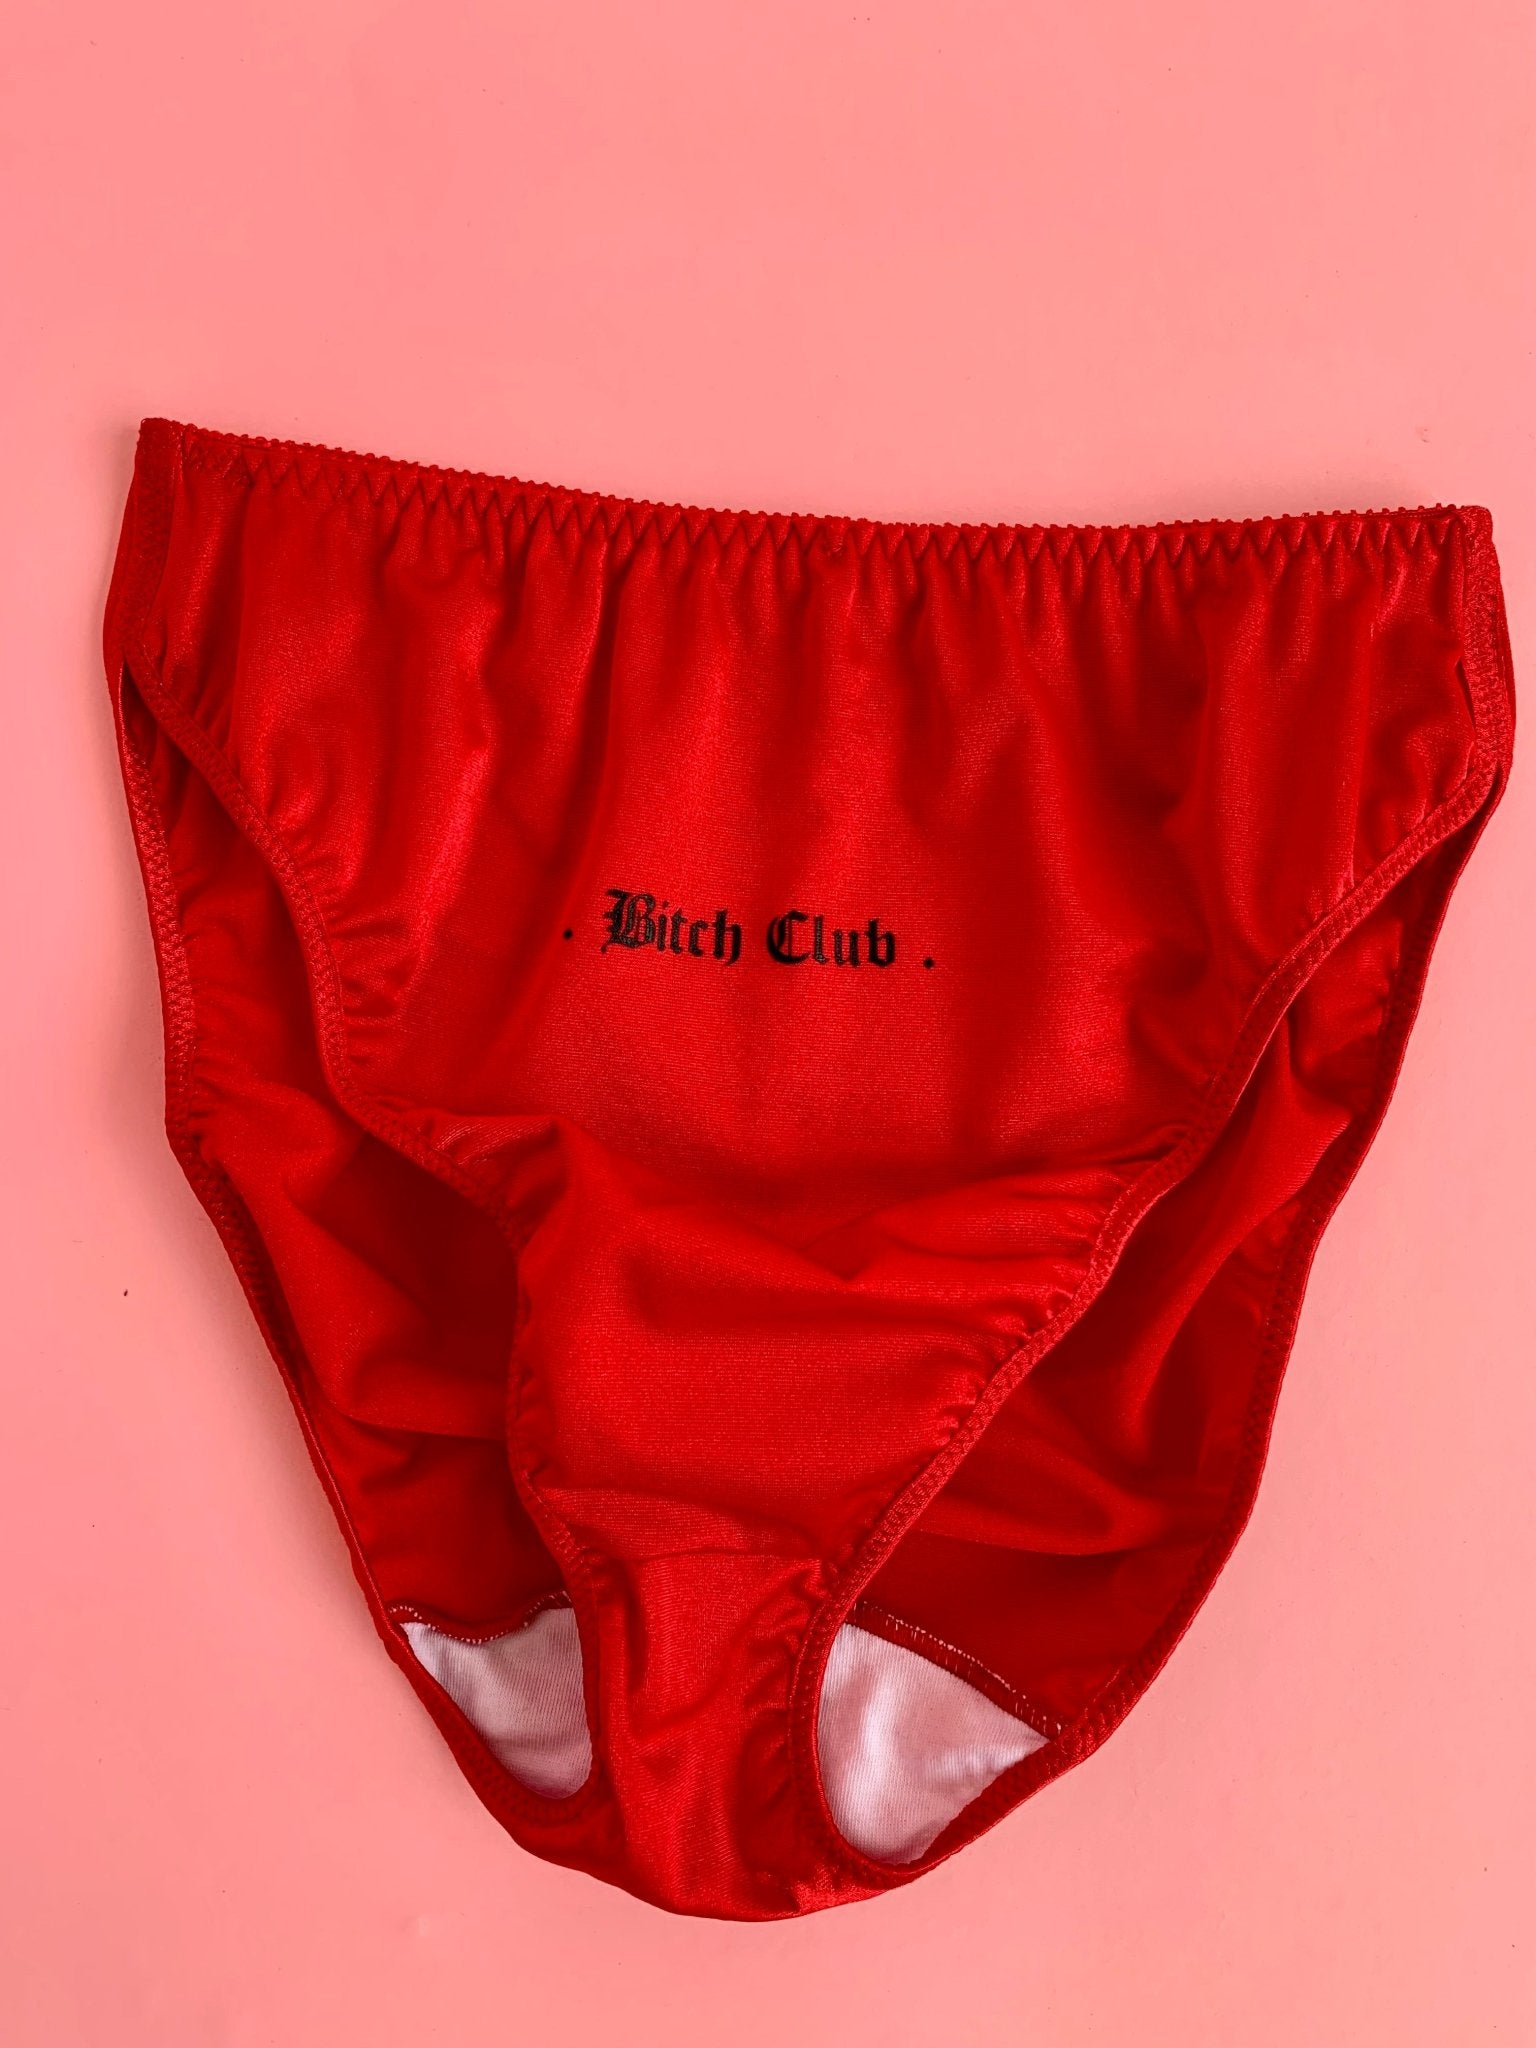 NEW!!! Bitch Club Satin Panties RED - The Nightshift